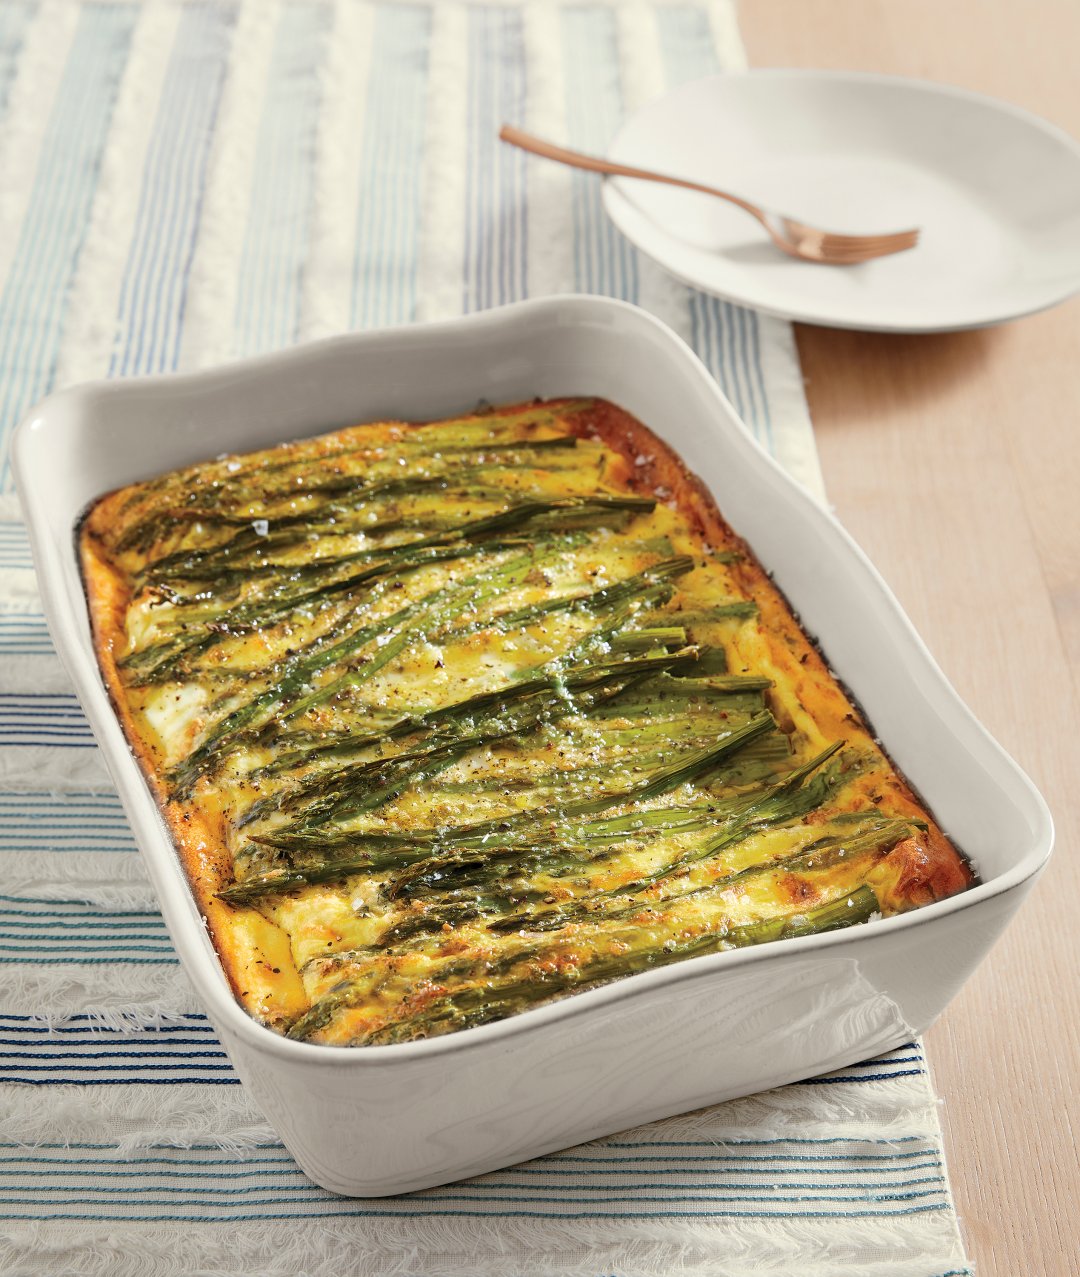 Asparagus Frittata Recipe | The Crate and Barrel Blog